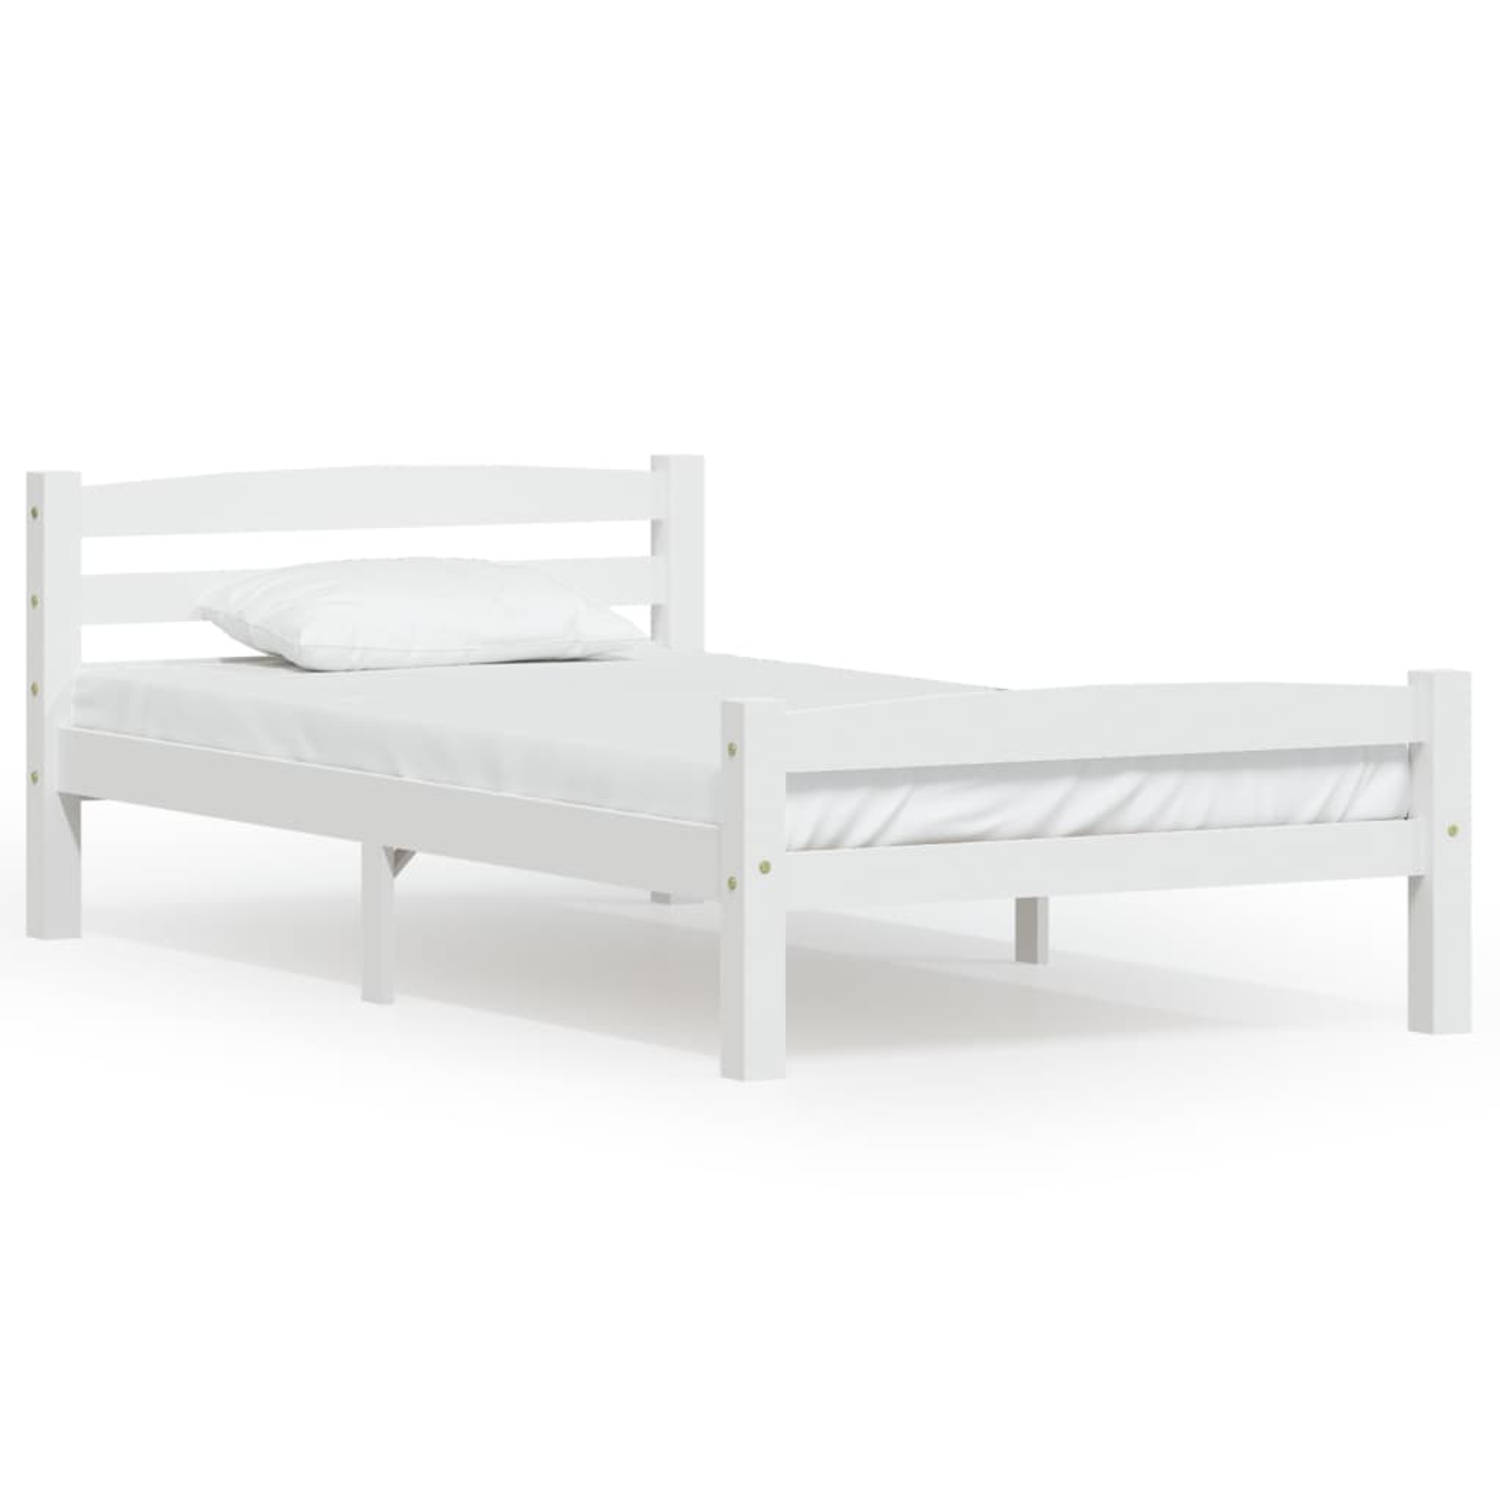 The Living Store Bedframe massief grenenhout wit 90x200 cm - Bedframe - Bedframe - Bed Frame - Bed Frames - Bed - Bedden - 1-persoonsbed - 1-persoonsbedden - Eenpersoons Bed